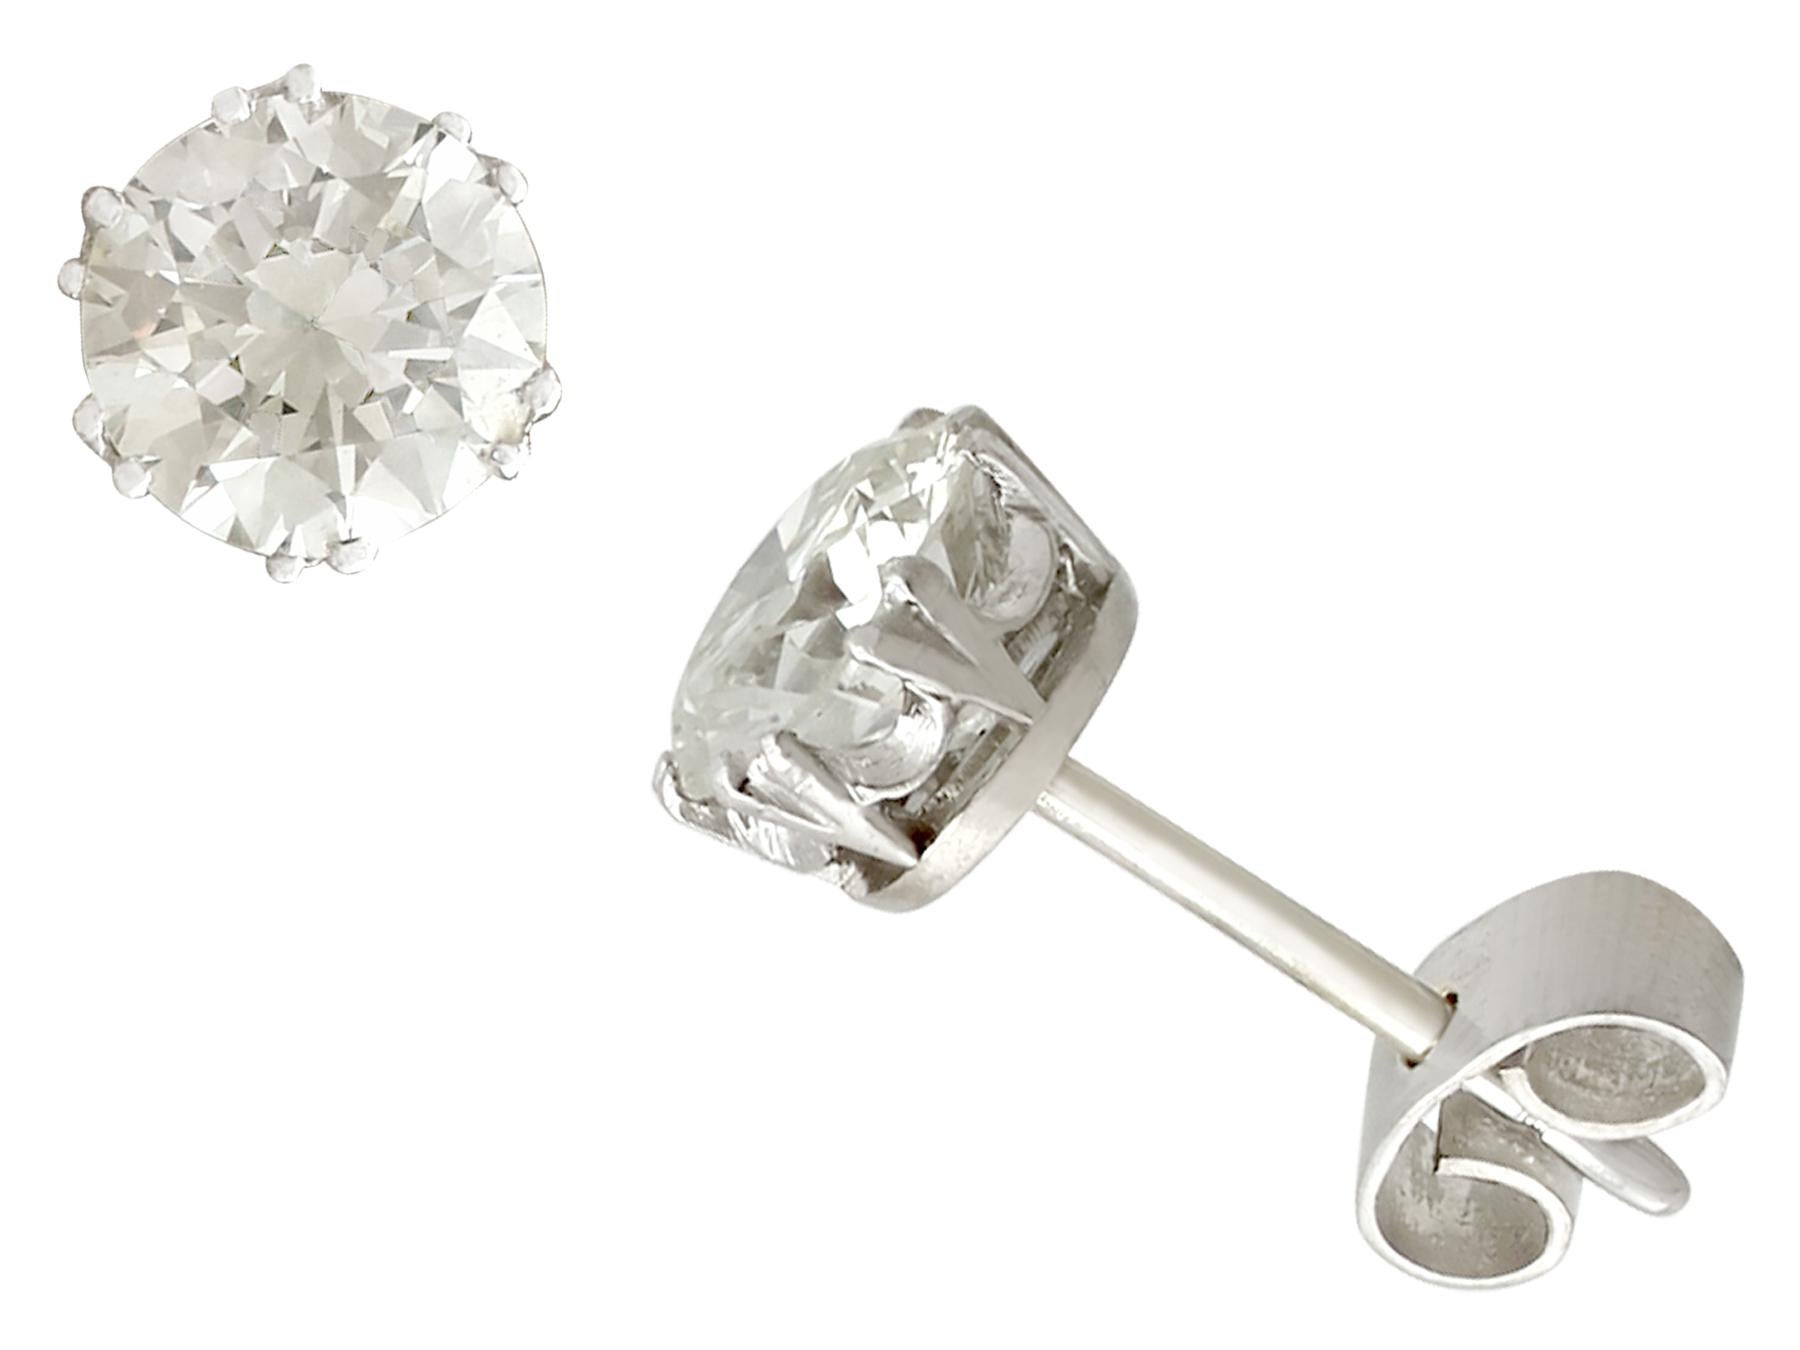 An impressive pair of vintage 2.39 carat diamond and platinum, 18 karat and 14 karat white gold stud earrings; part of our diverse diamond jewellery and estate jewelry collections.

These fine and impressive vintage diamond earrings have been